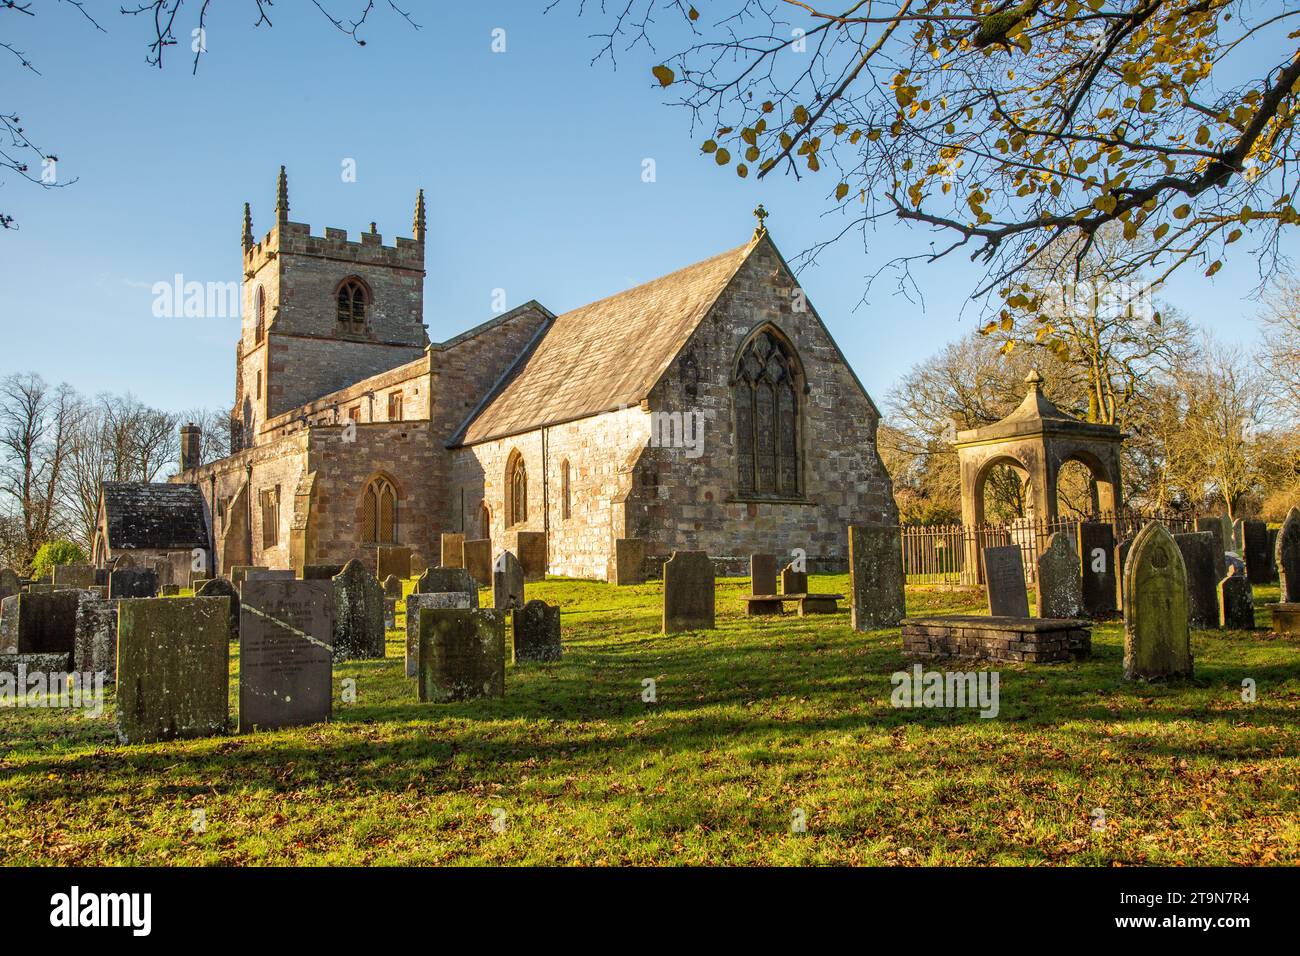 The parish church of St Peter in the Staffordshire Moorlands Peak District village of Alstonefield Stock Photo